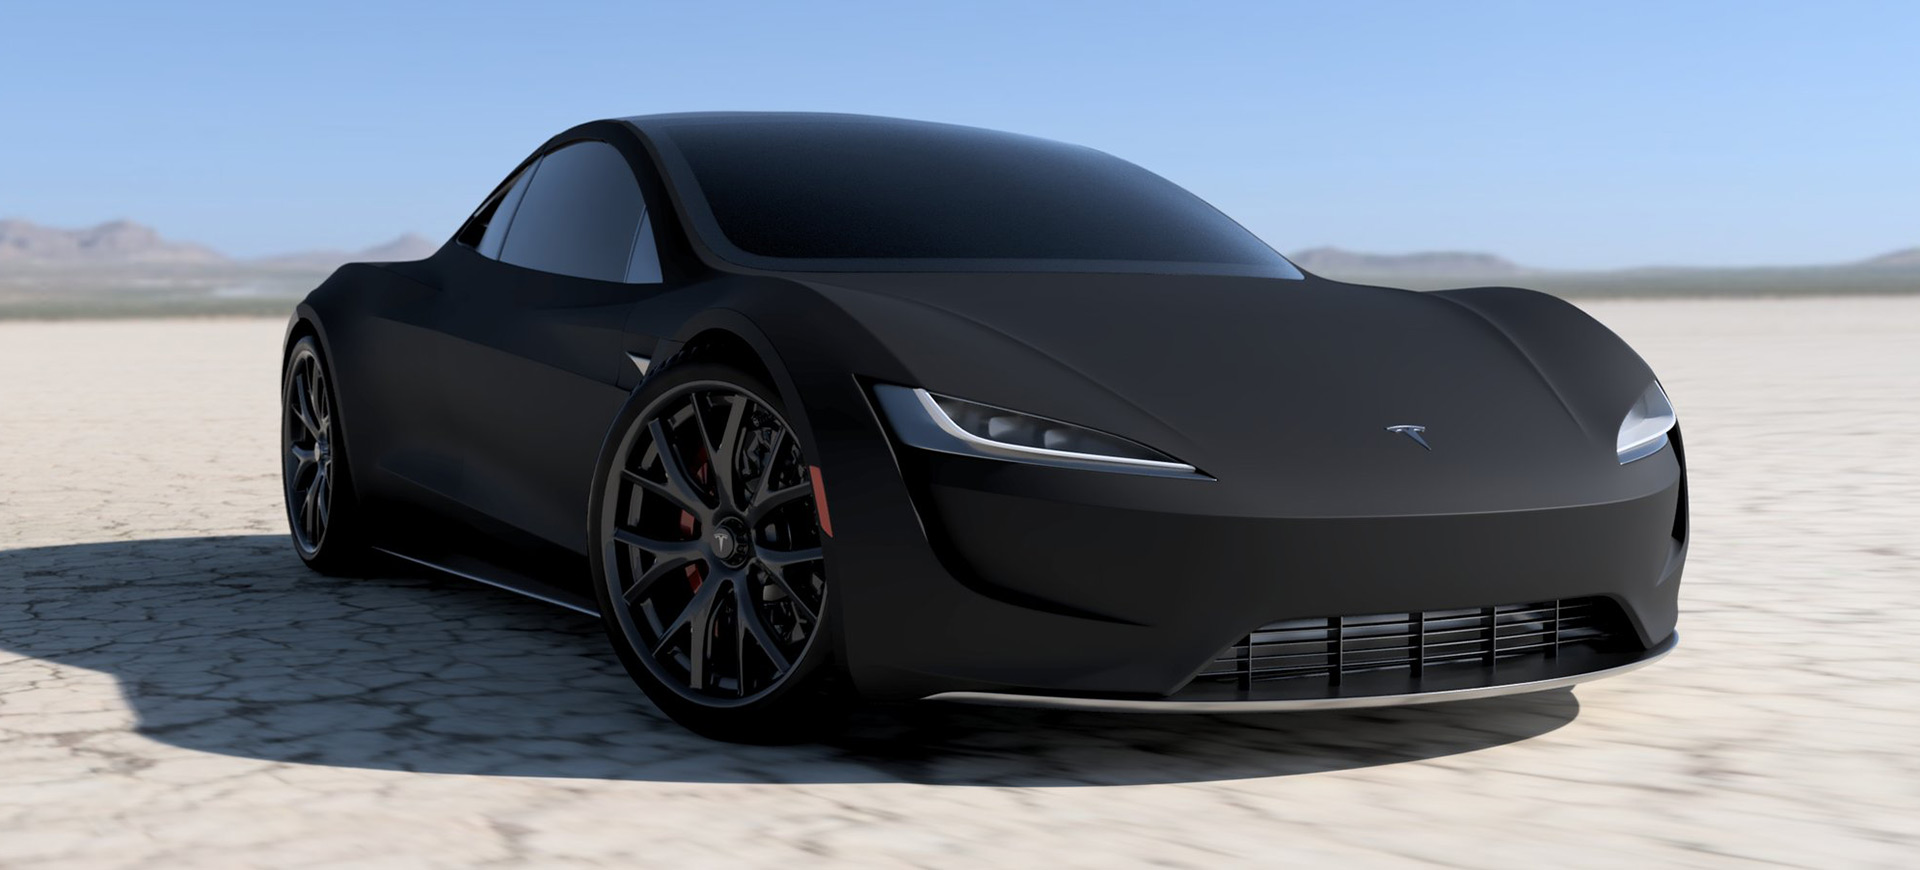 See Some Jaw Dropping Renders Of The 2020 Tesla Roadster In Red, White And More